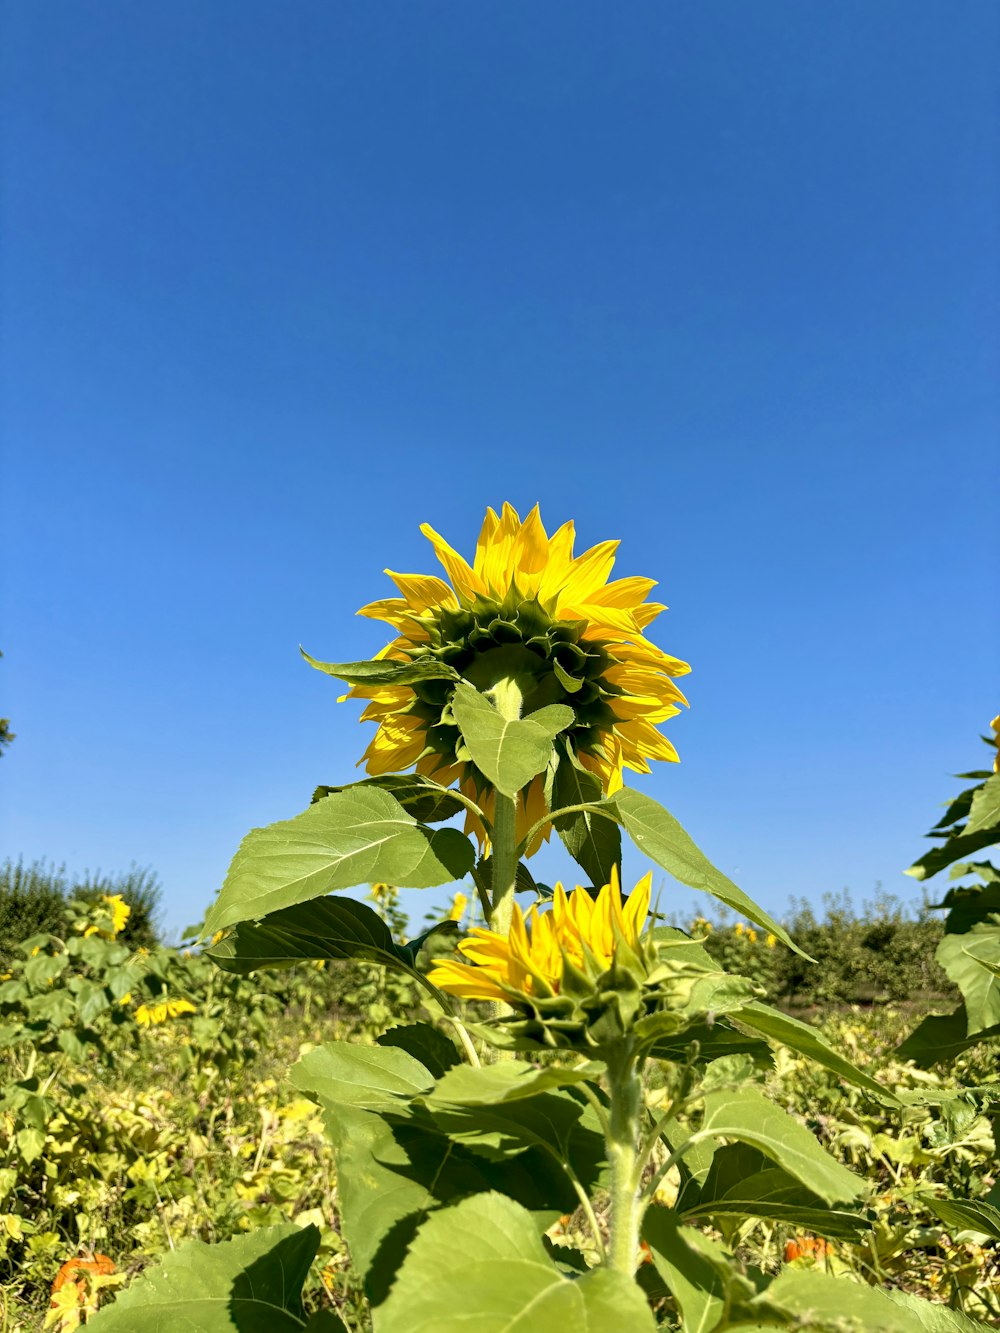 a sunflower in a field with a blue sky in the background